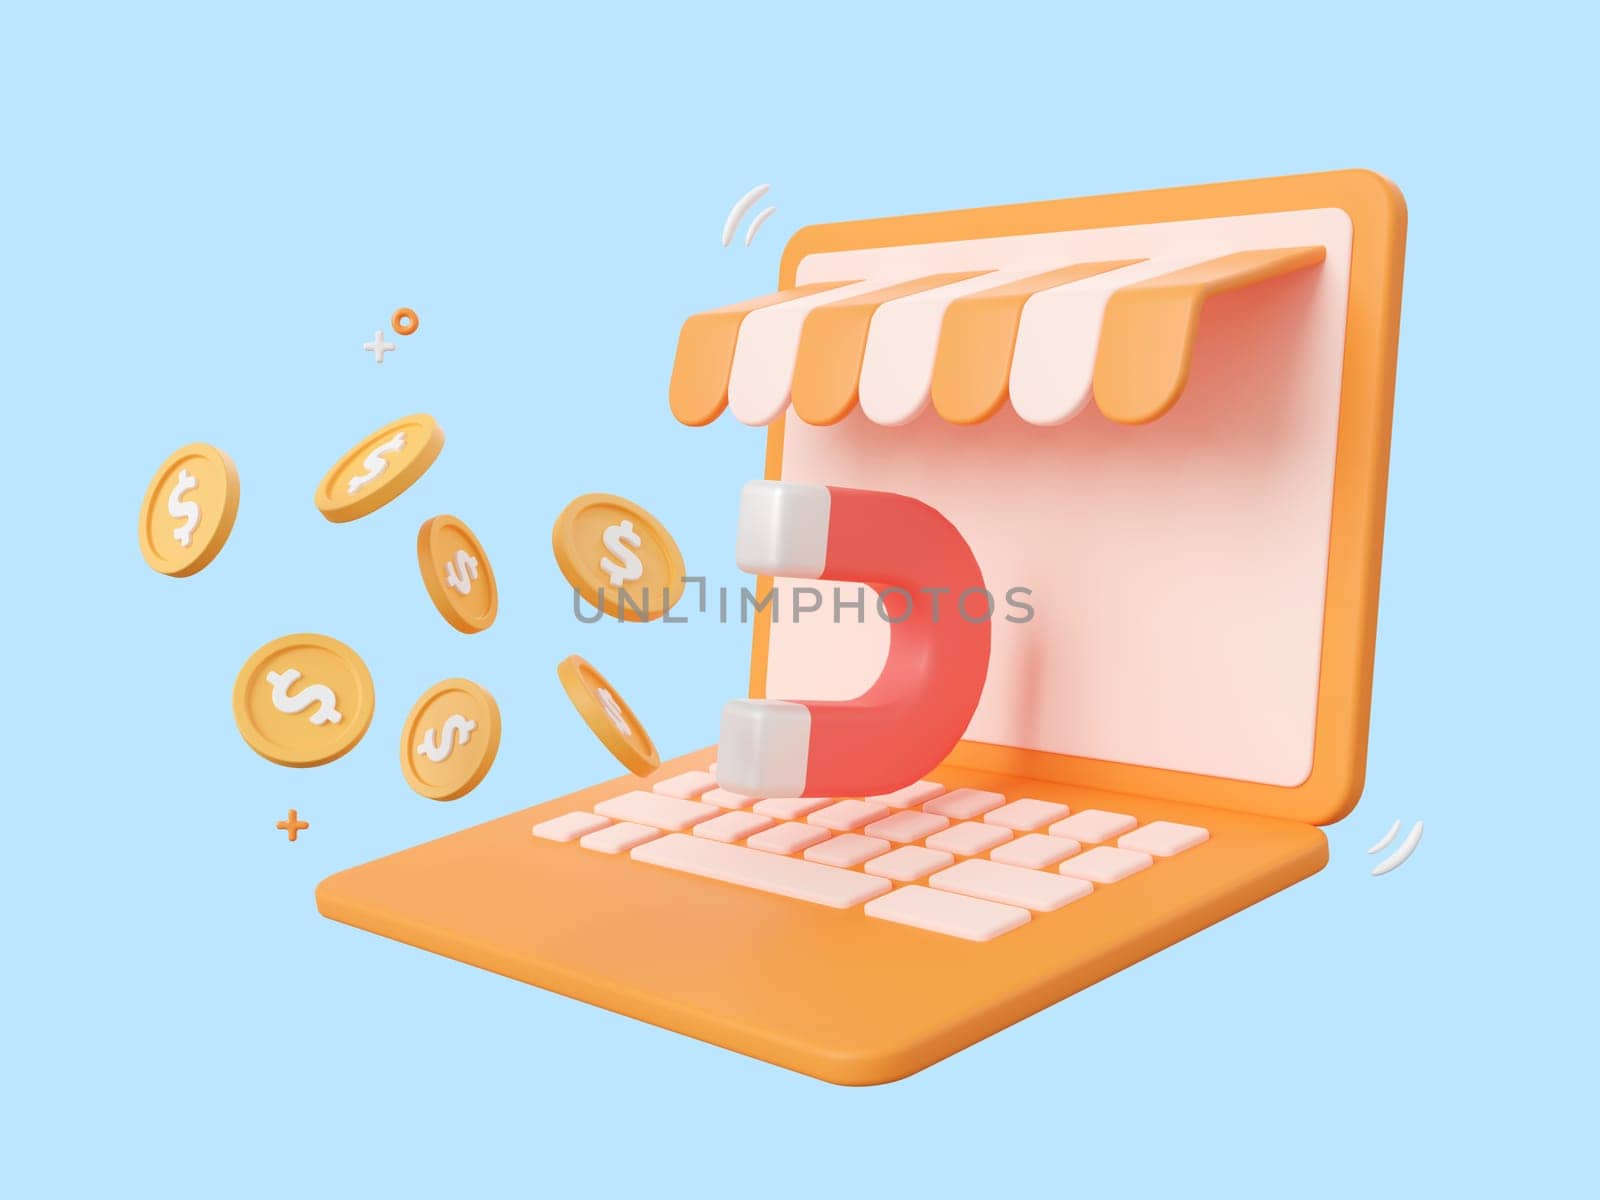 3d cartoon design illustration of Laptop store with magnet attracts gold coins. by nutzchotwarut